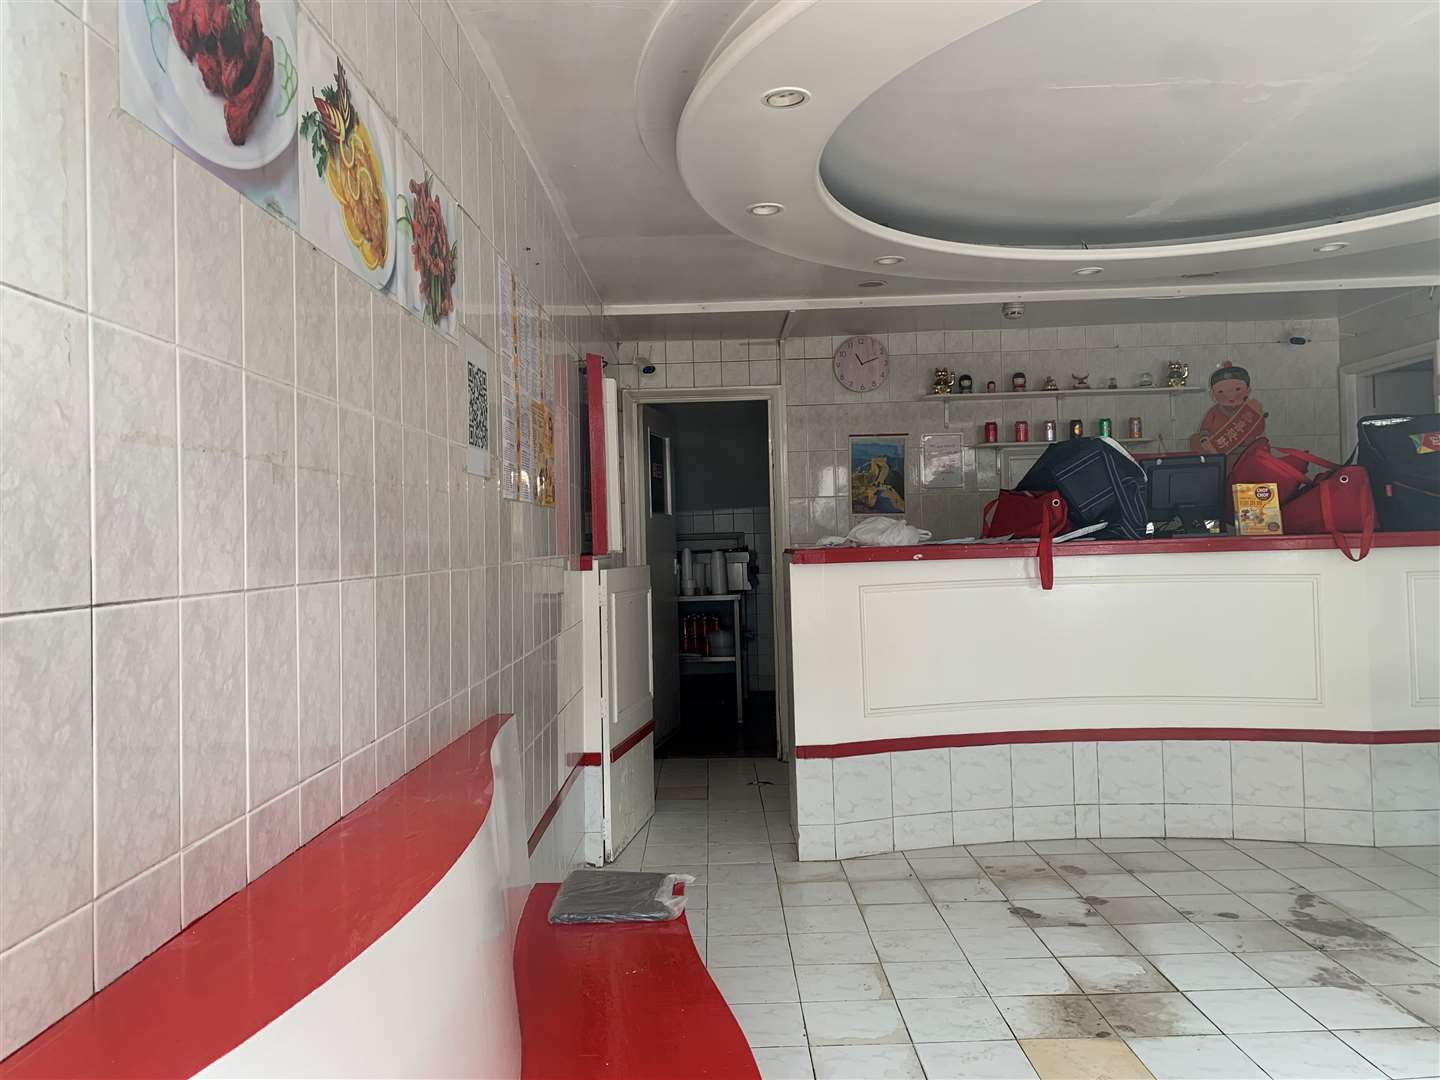 A walk-in fridge full of rotten food at the Chinese in St Dunstan's Street, Canterbury, was found to be the source of the smell